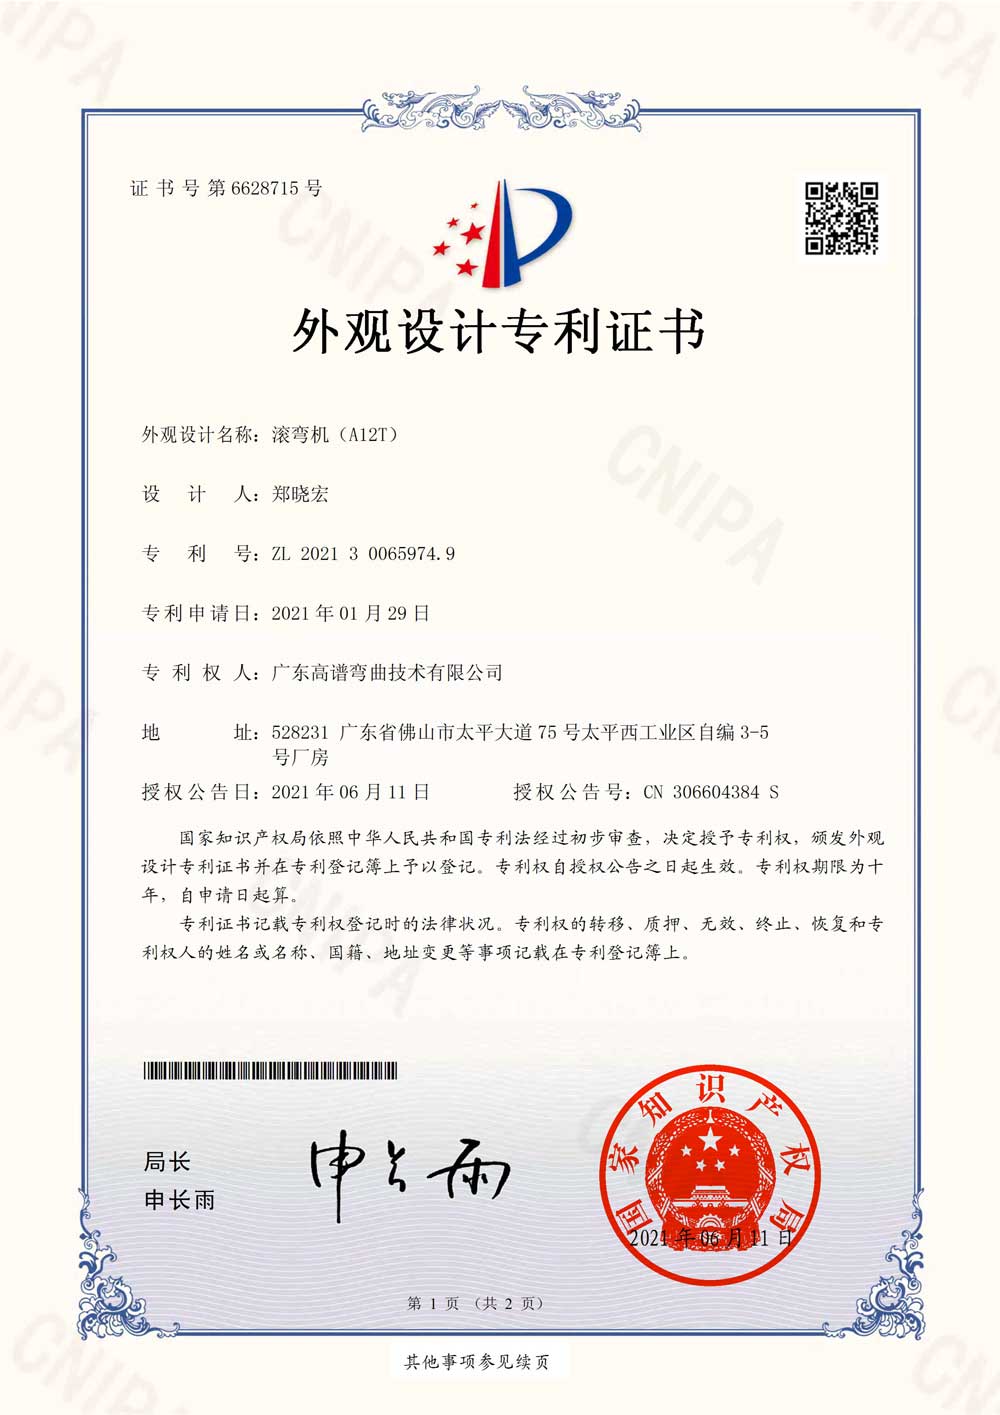 Patent certificate of appearance design of rolling and bending machine